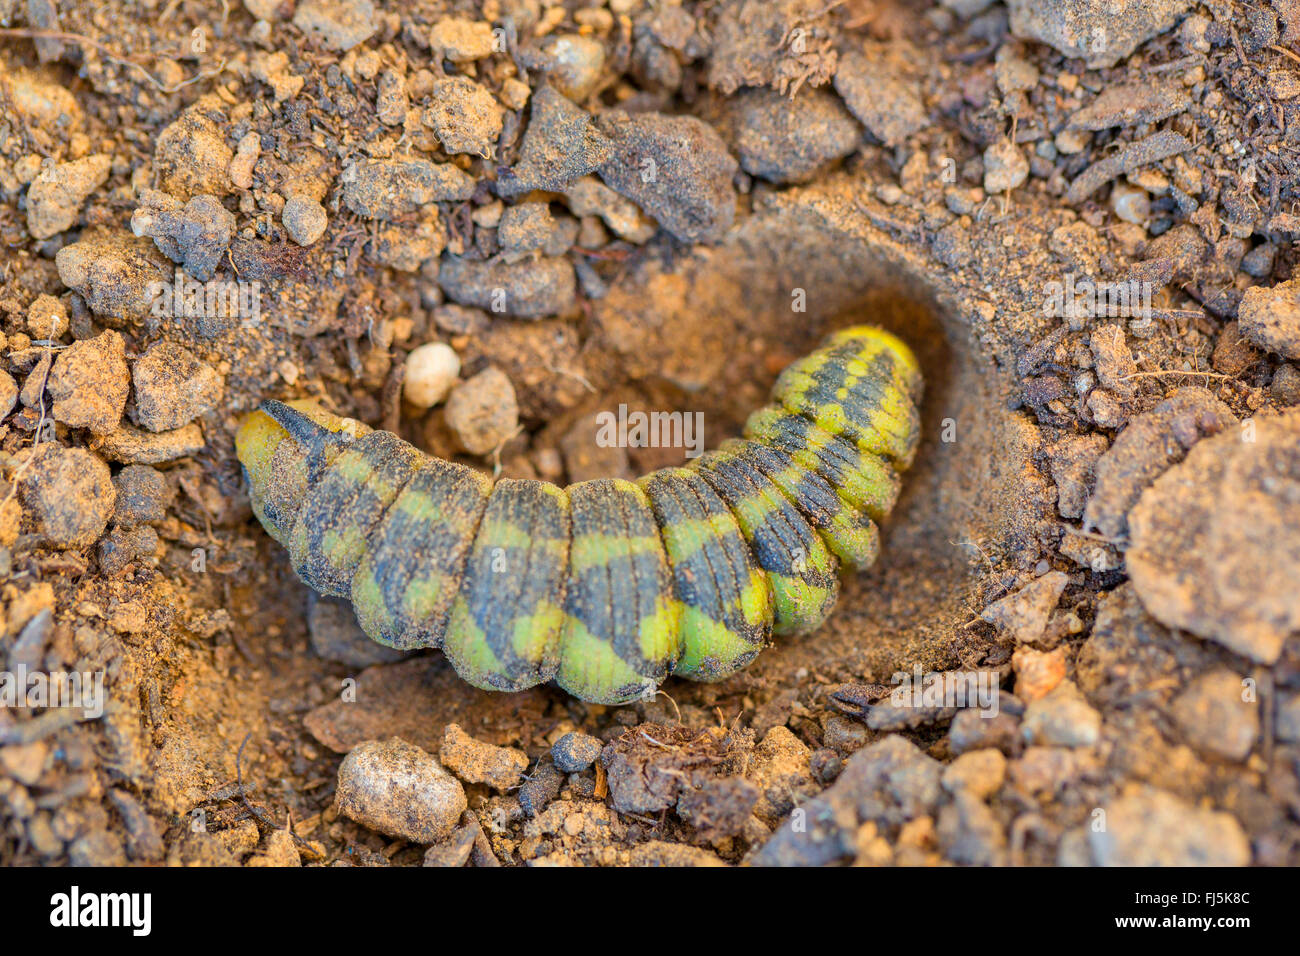 Convolvulus hawkmoth, Morning glory sphinx moth (Agrius convolvuli, Herse convolvuli, Sphinx convolvuli), caterpillar shortly before pupation in opened underground burrow, Germany, Bavaria Stock Photo